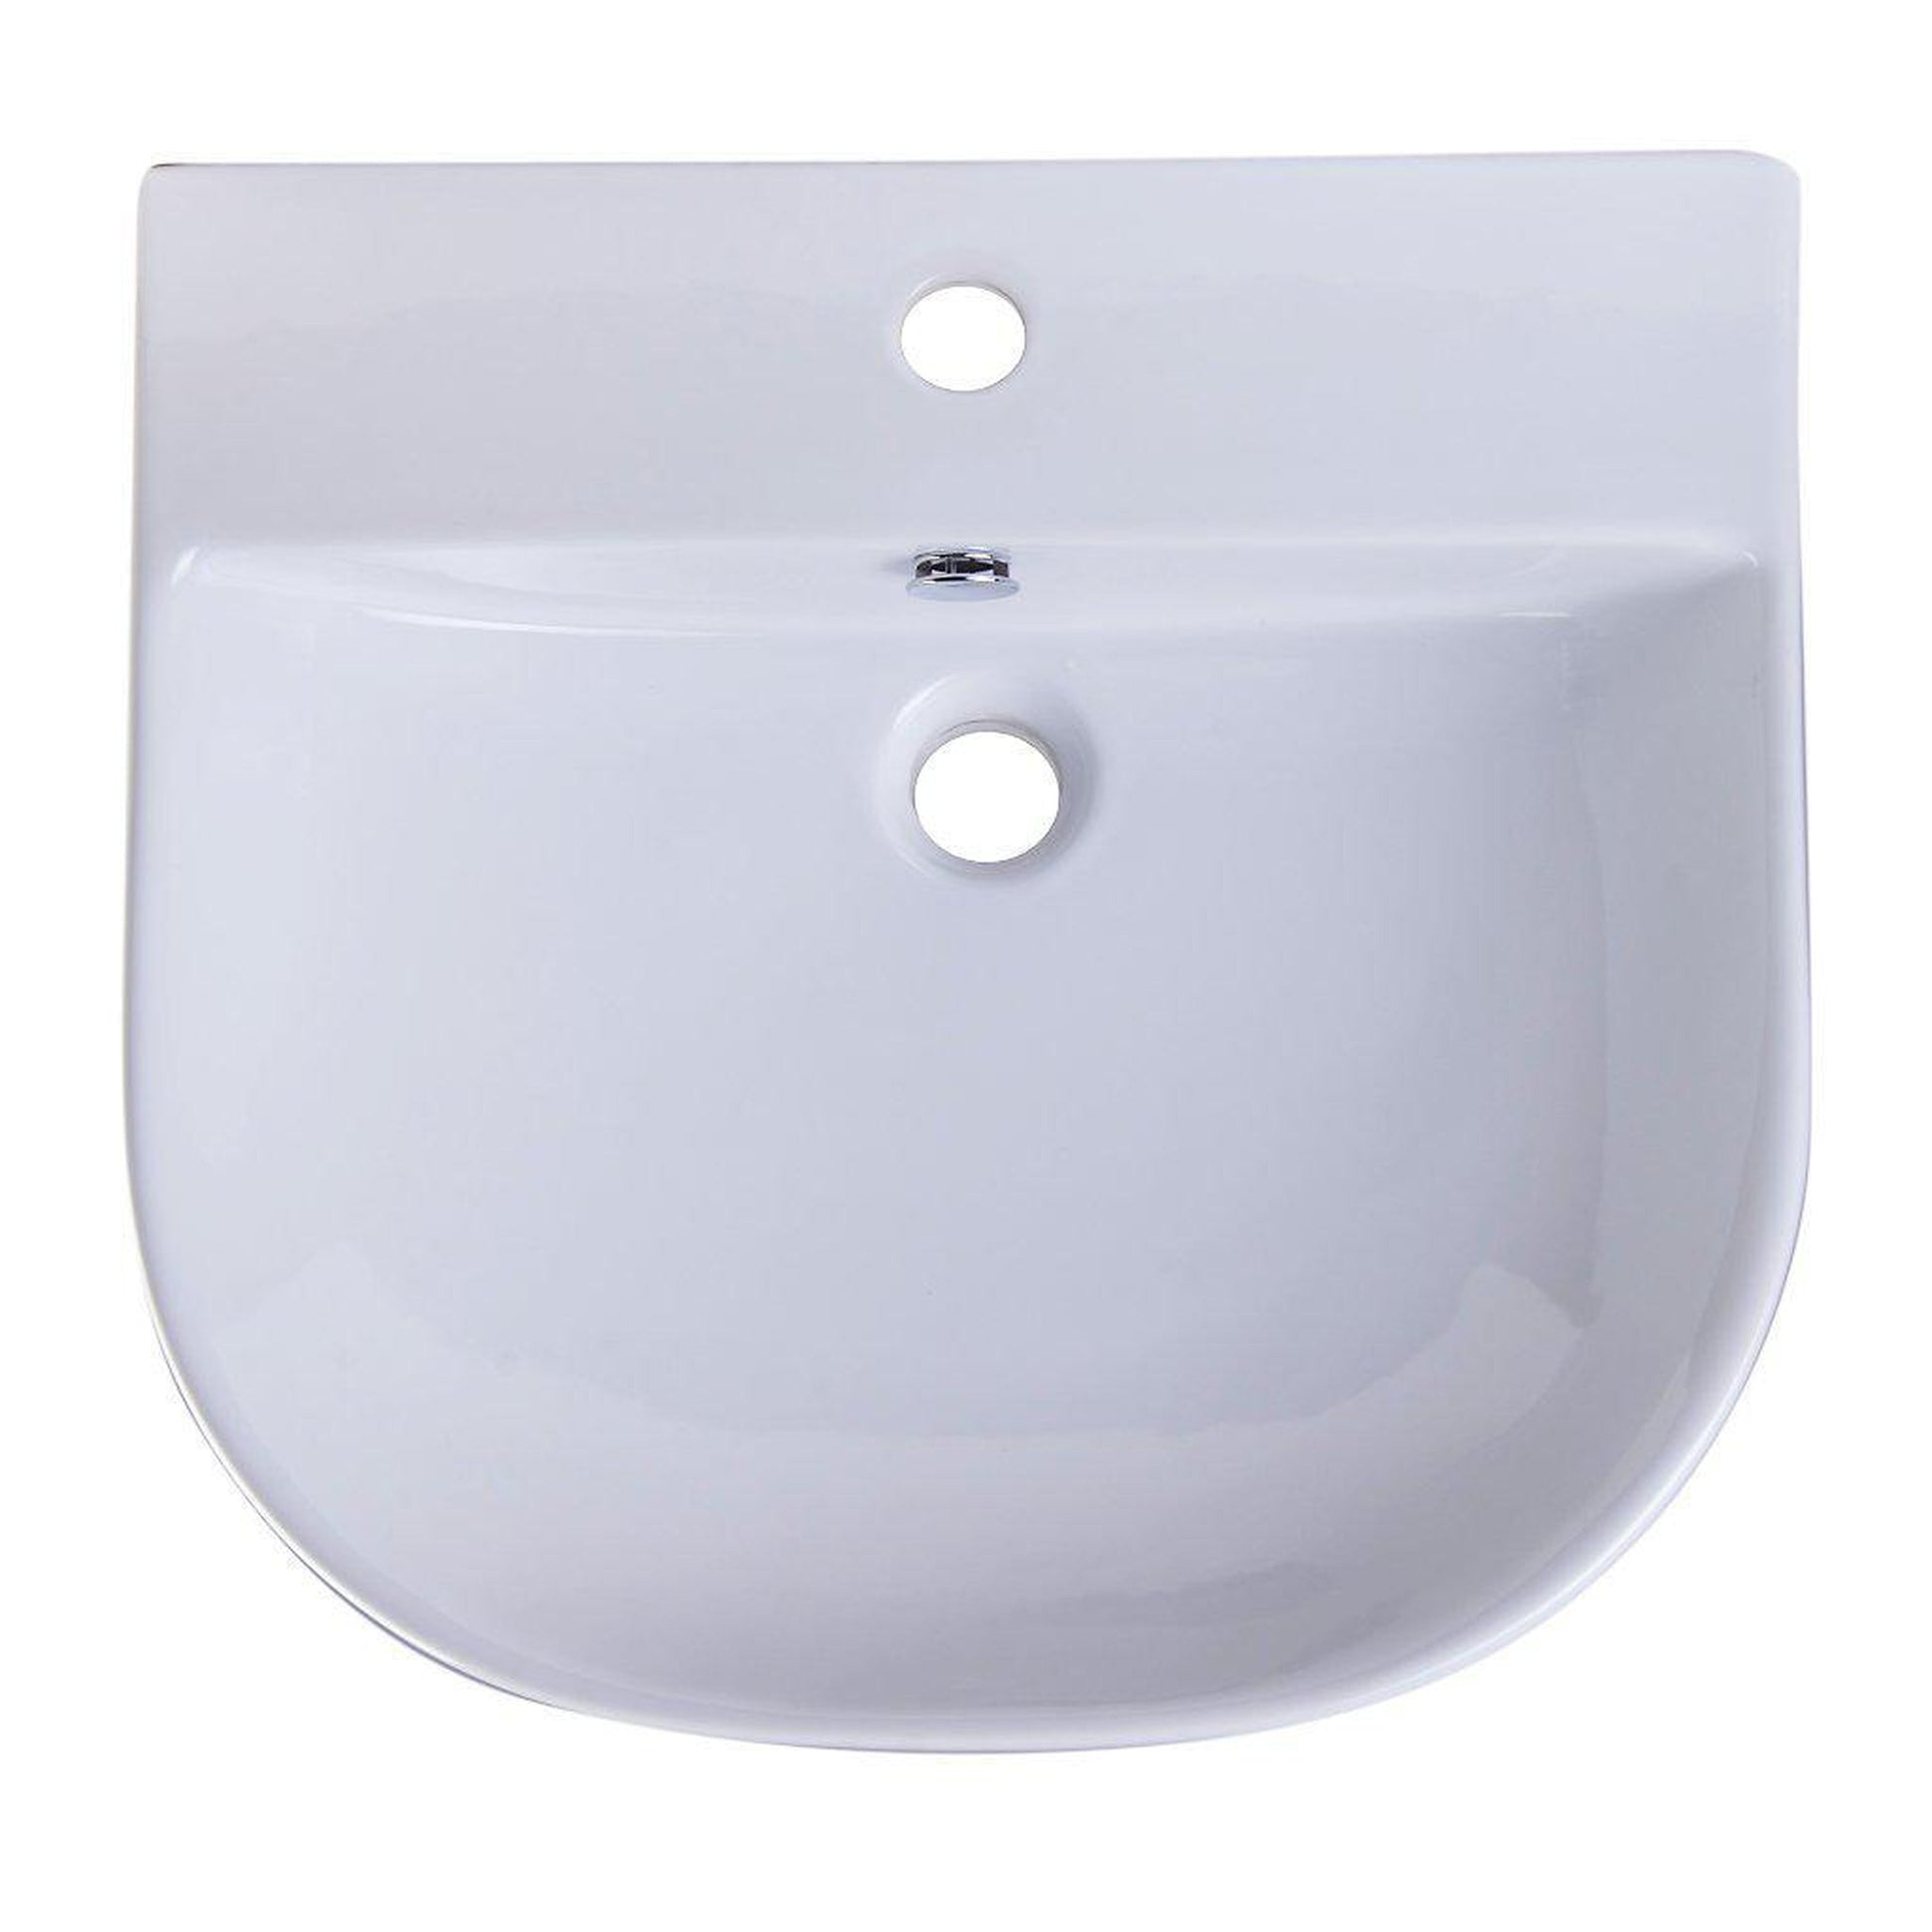 ALFI Brand AB110 20" White Wall-Mounted D-Shaped Ceramic Bathroom Sink With Single Faucet Hole and Overflow